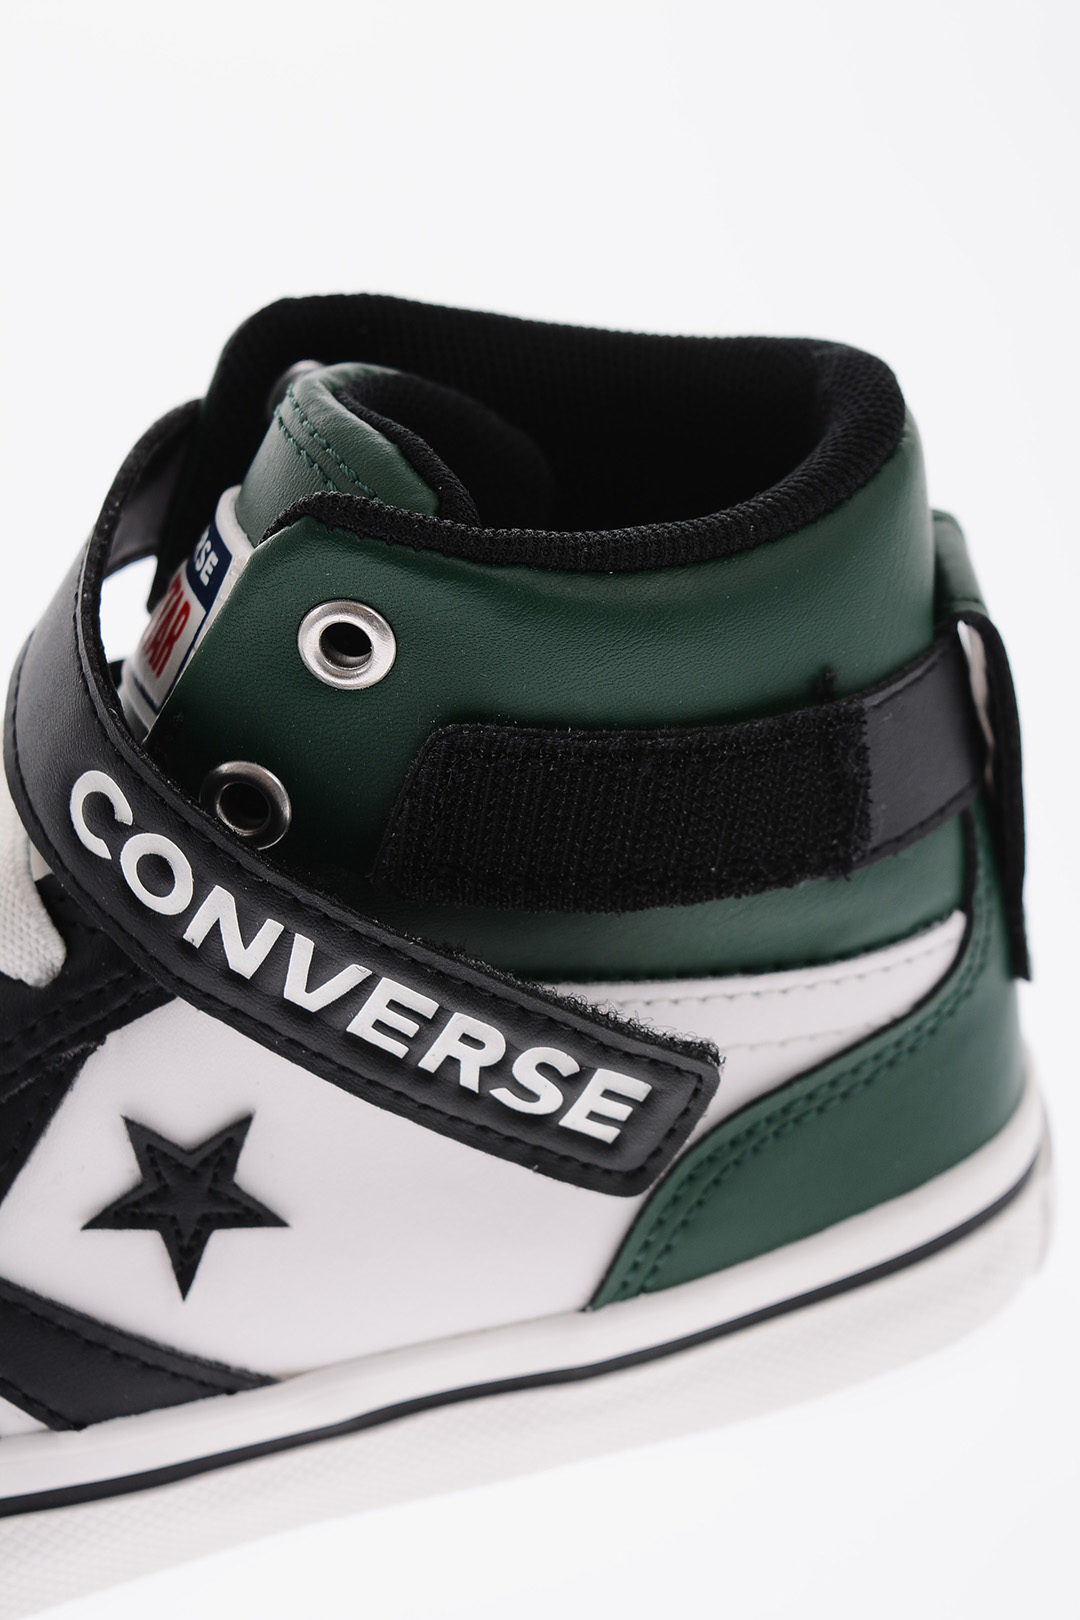 Converse KIDS ALL STAR Leather High Top Sneakers unisex boys - Glamood Outlet